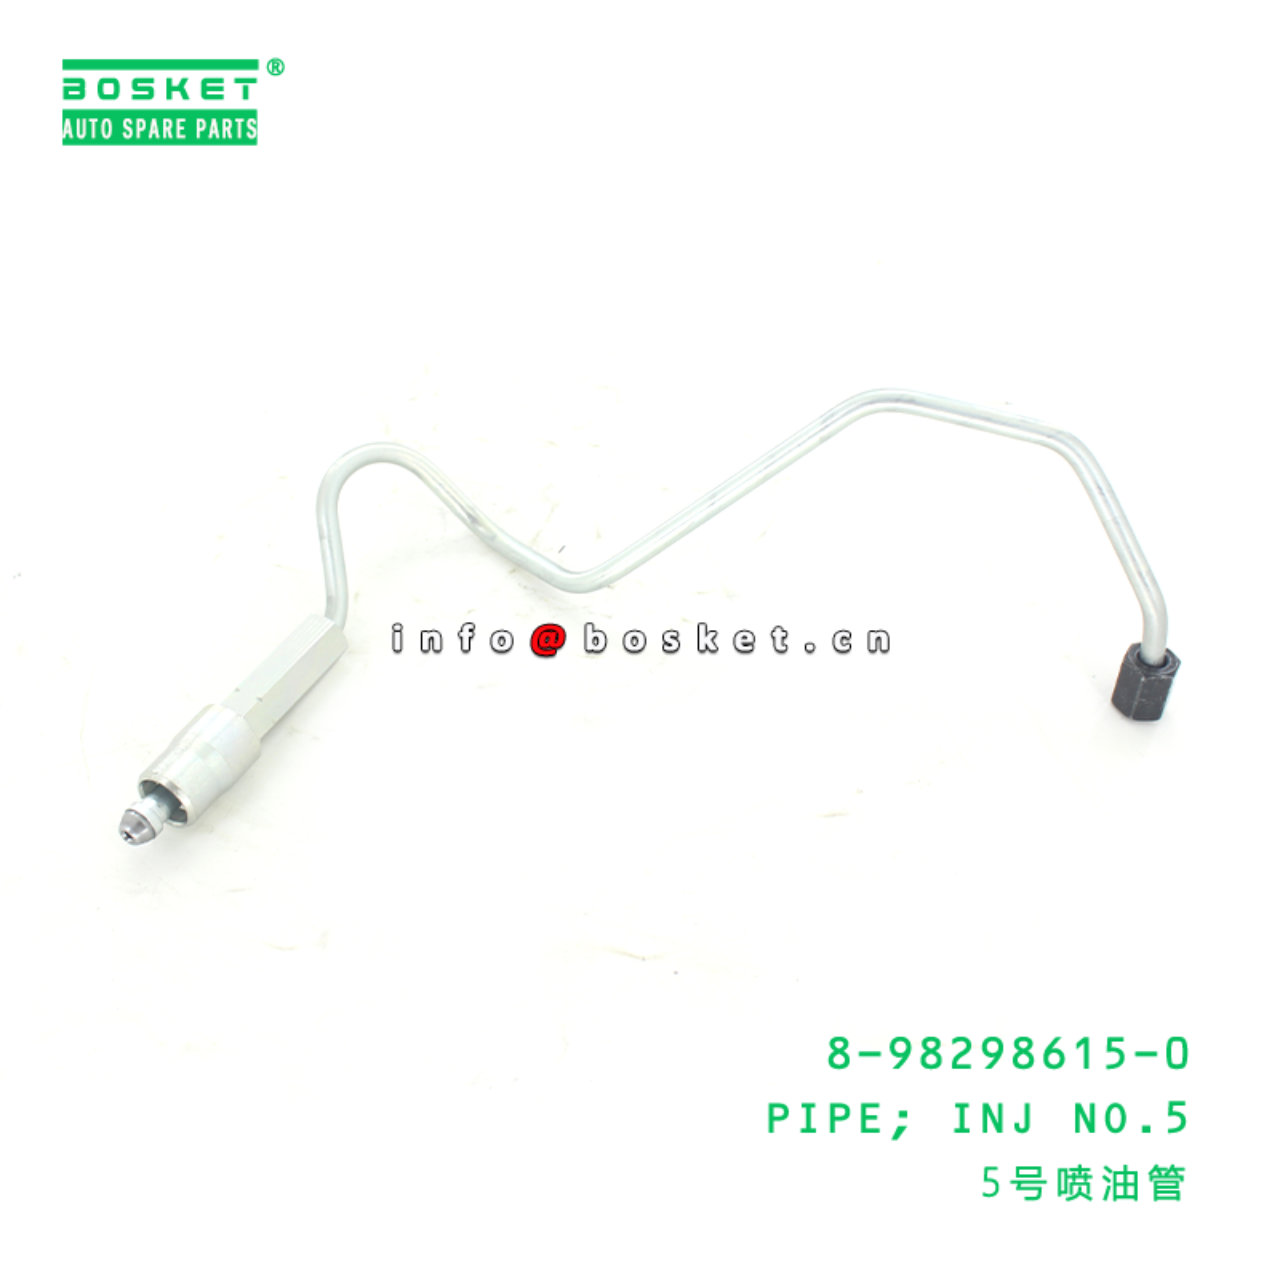 8-98298615-0 Injecting No.5 Pipe 8982986150 Suitable for ISUZU FRR